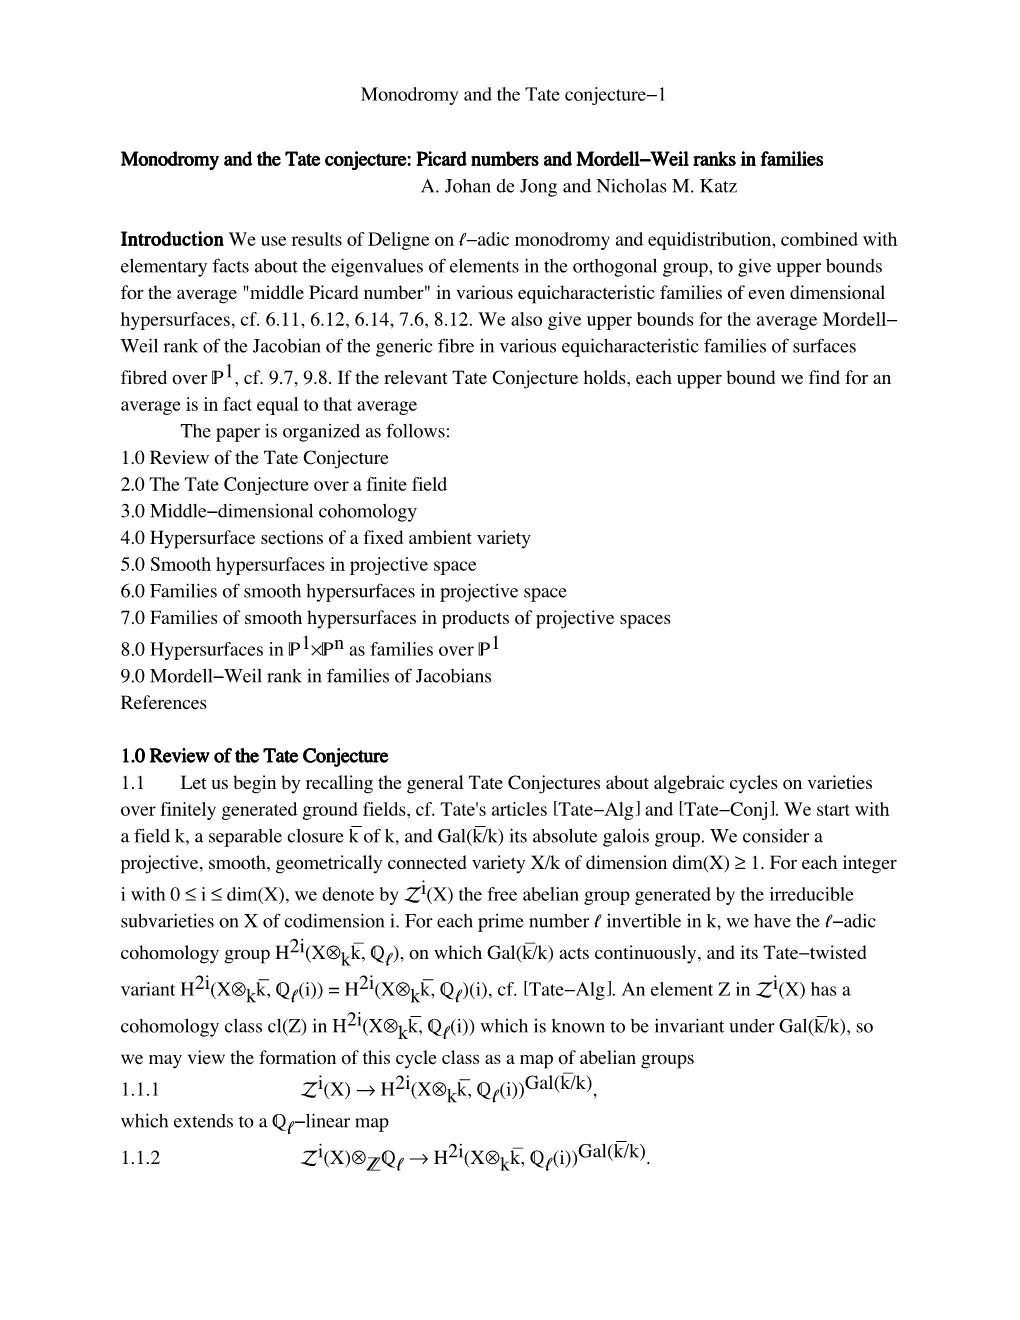 Monodromy and the Tate Conjecture-1